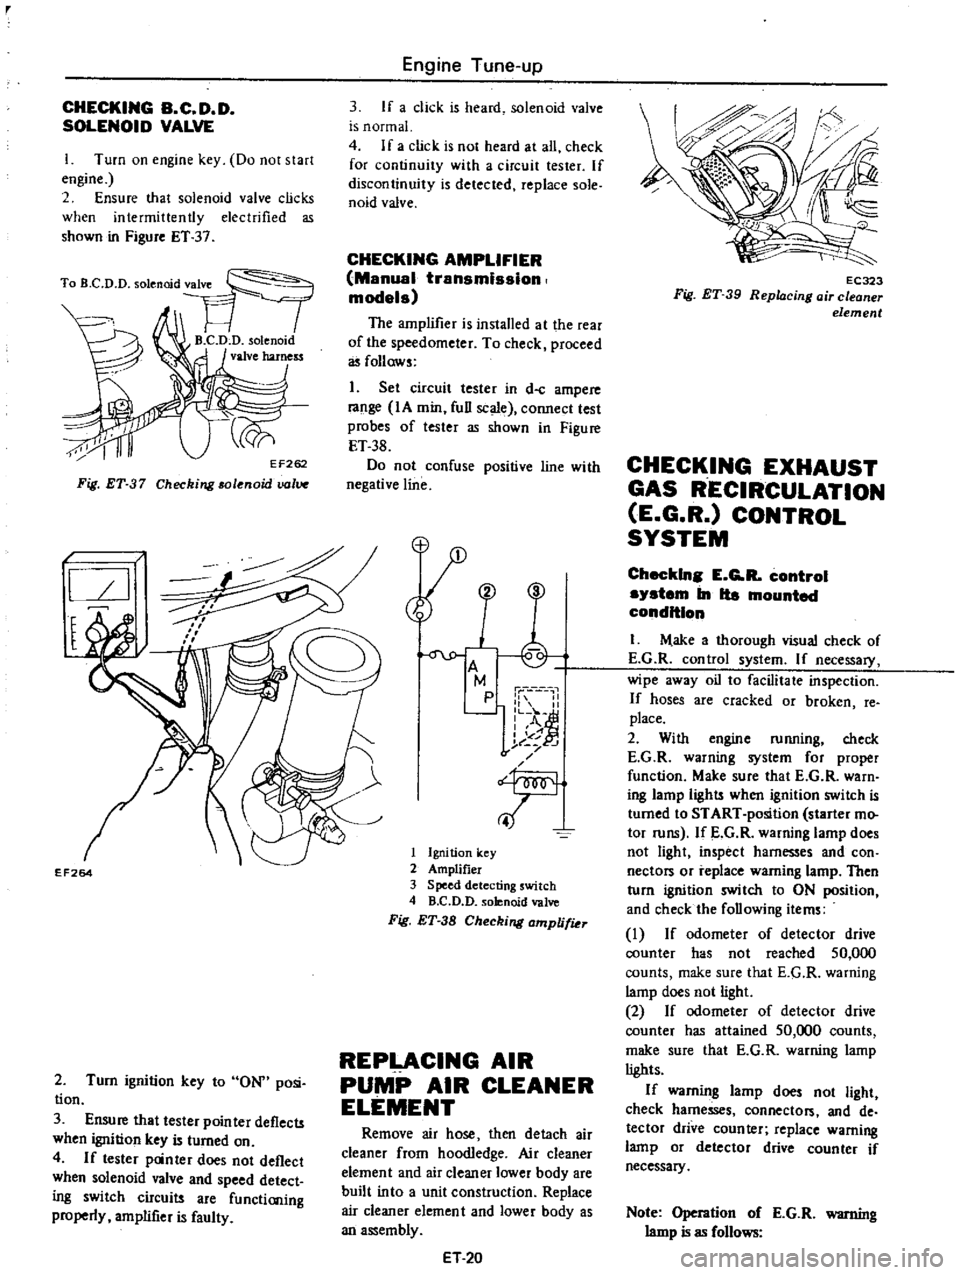 DATSUN PICK-UP 1977  Service Manual 
r

CHECKING 
B 
C

D 
D

SOLENOID 
VALVE

I 
Turn 
on

engine 
key 
Do 
not 
start

engine

2 
Ensure 
that 
solenoid 
valve

clicks

when

intermittently 
electrified 
as

shown 
in

Figure 
ET 
37
